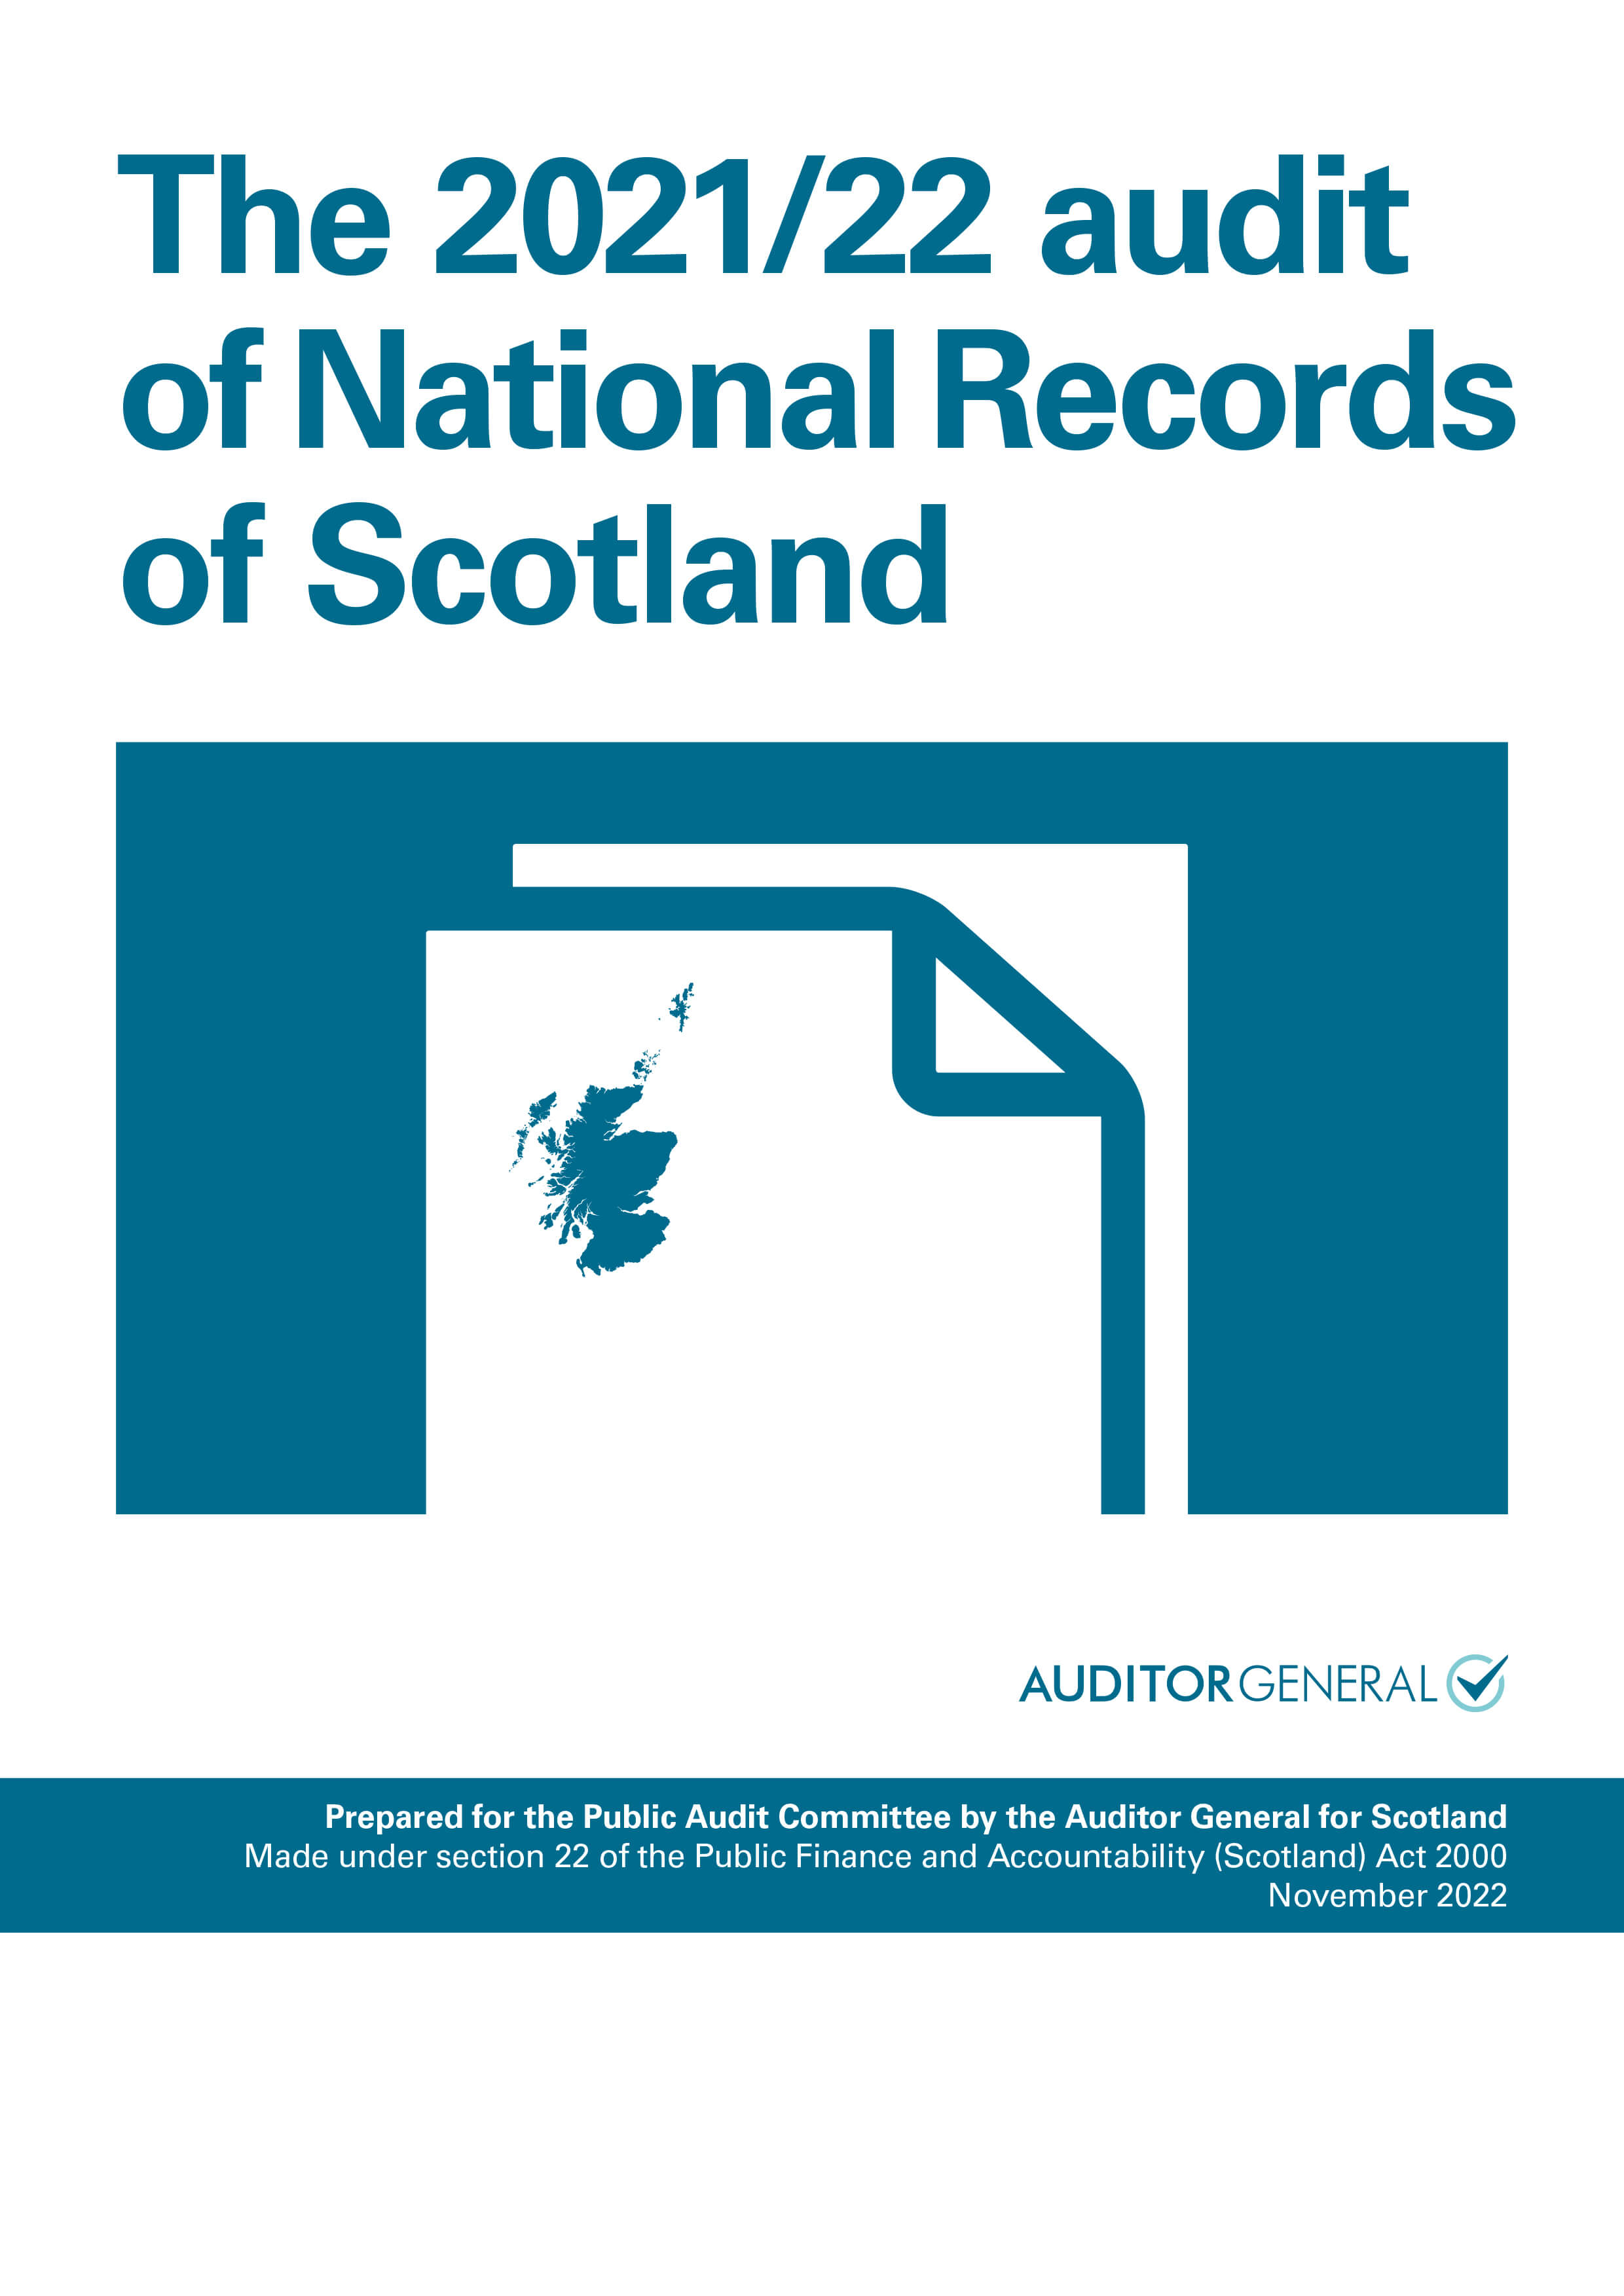 View The 2021/22 audit of National Records of Scotland